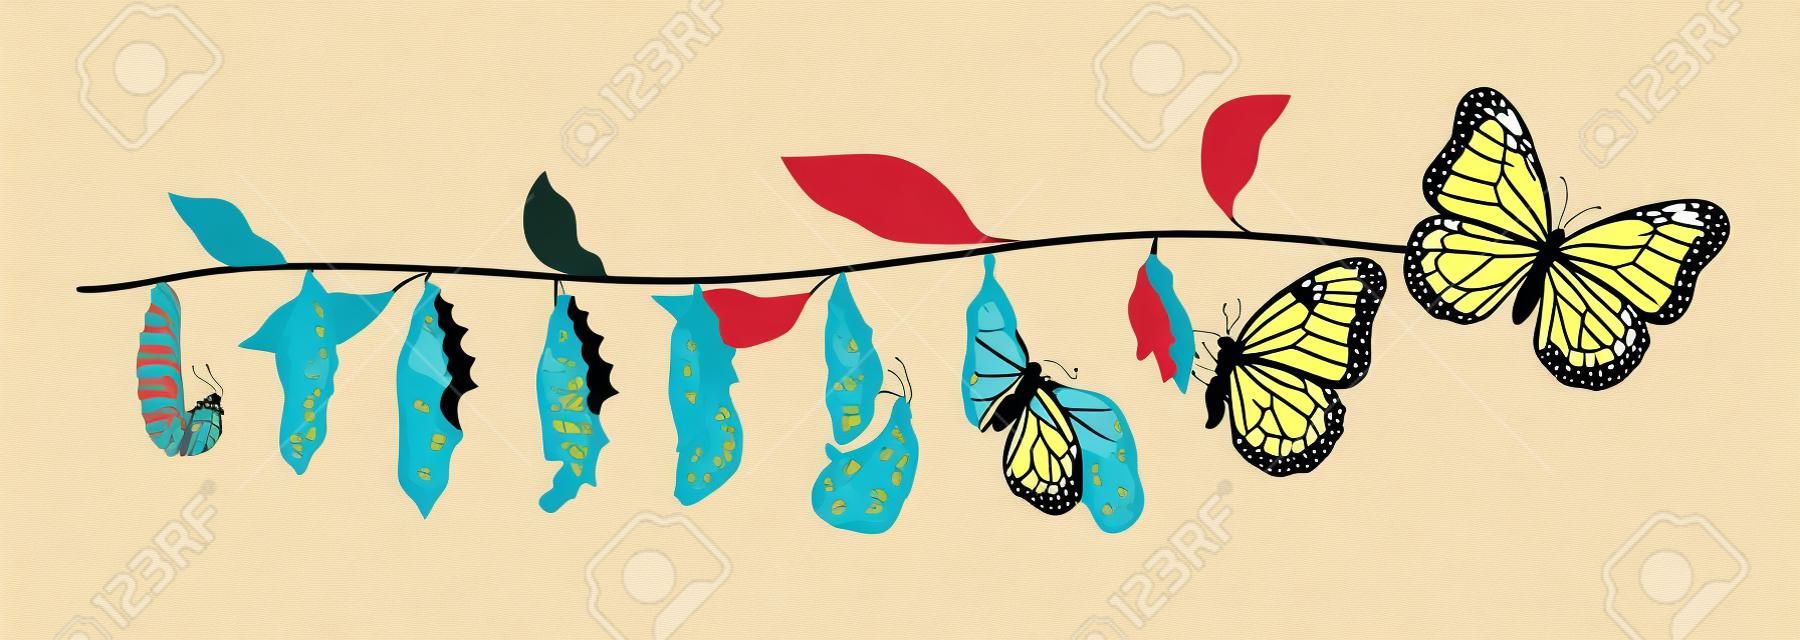 Life cycle of butterfly from larva to adult insect. Flying creature. Entomology theme. Flat vector design